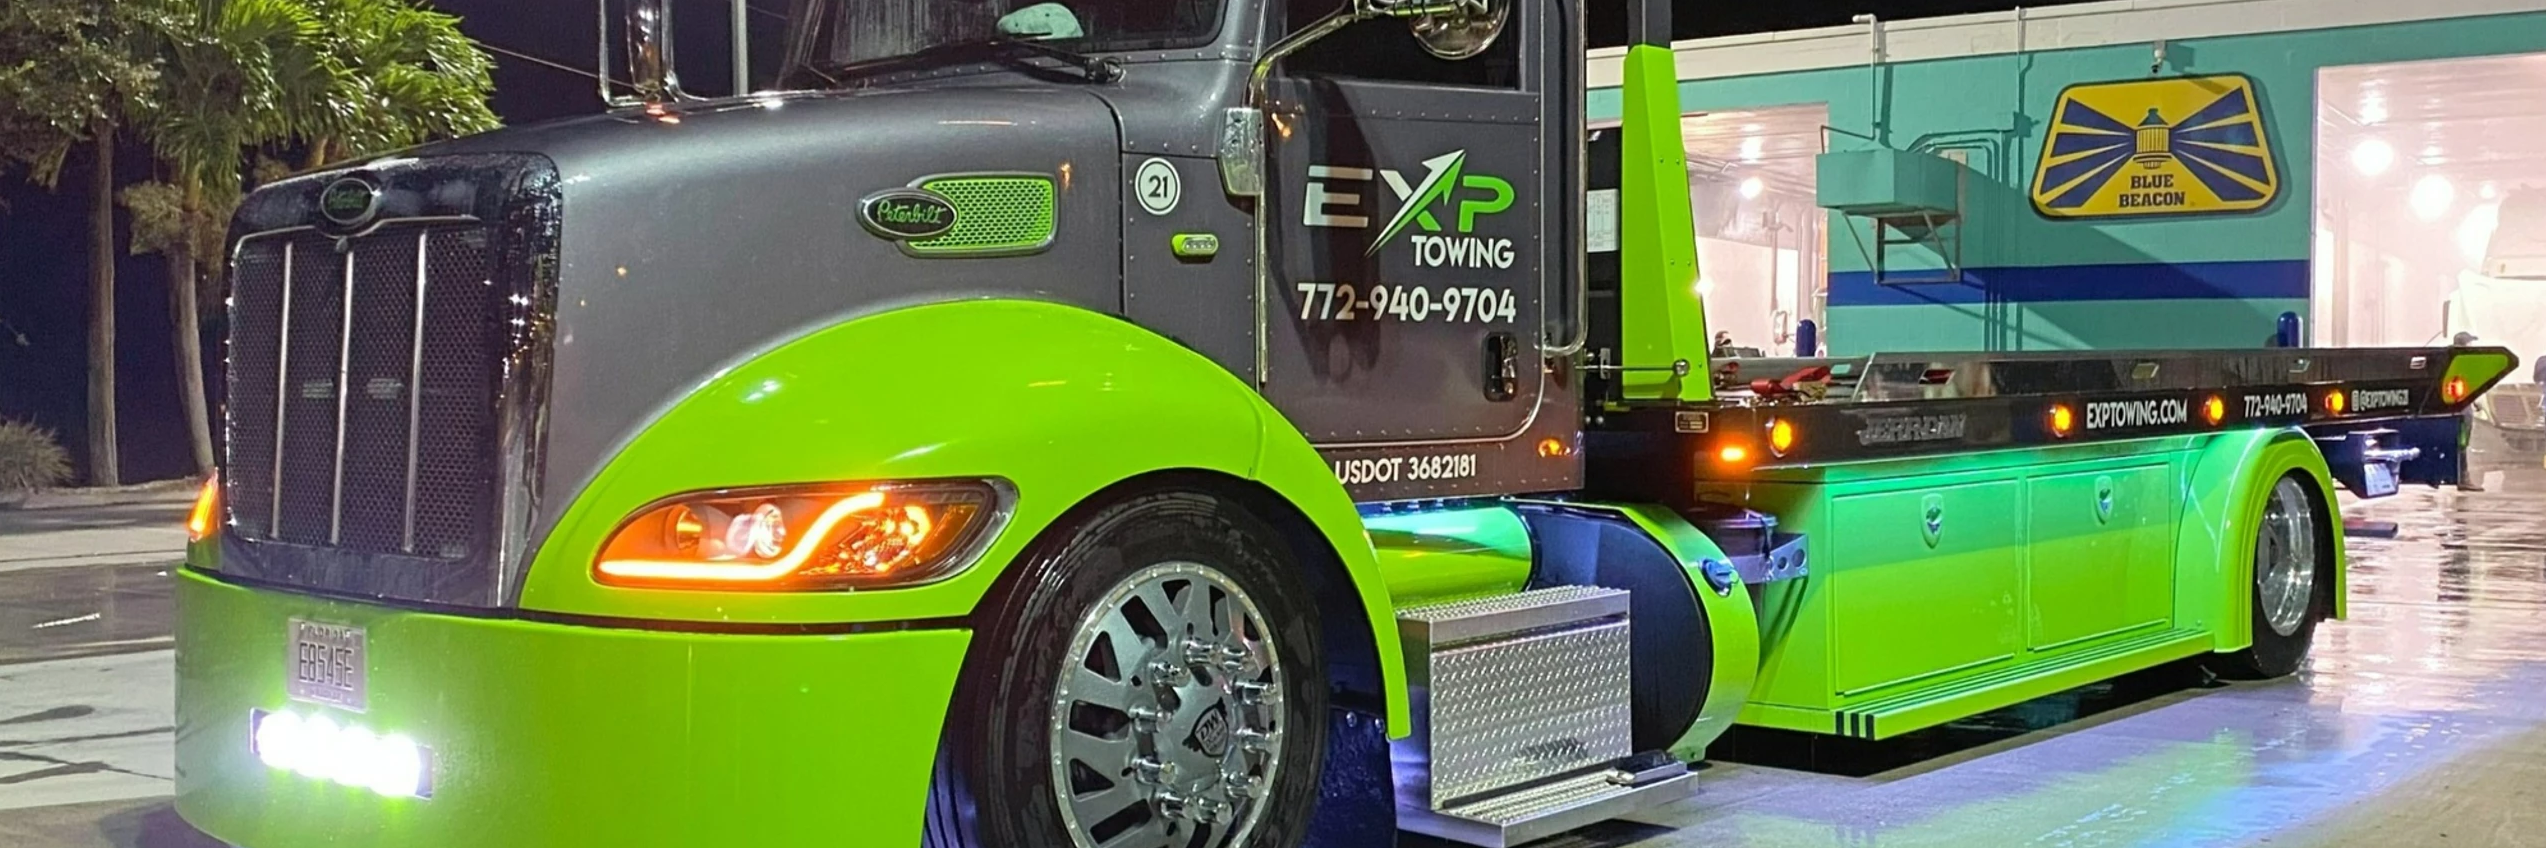 EXP Towing Towing.com Profile Banner